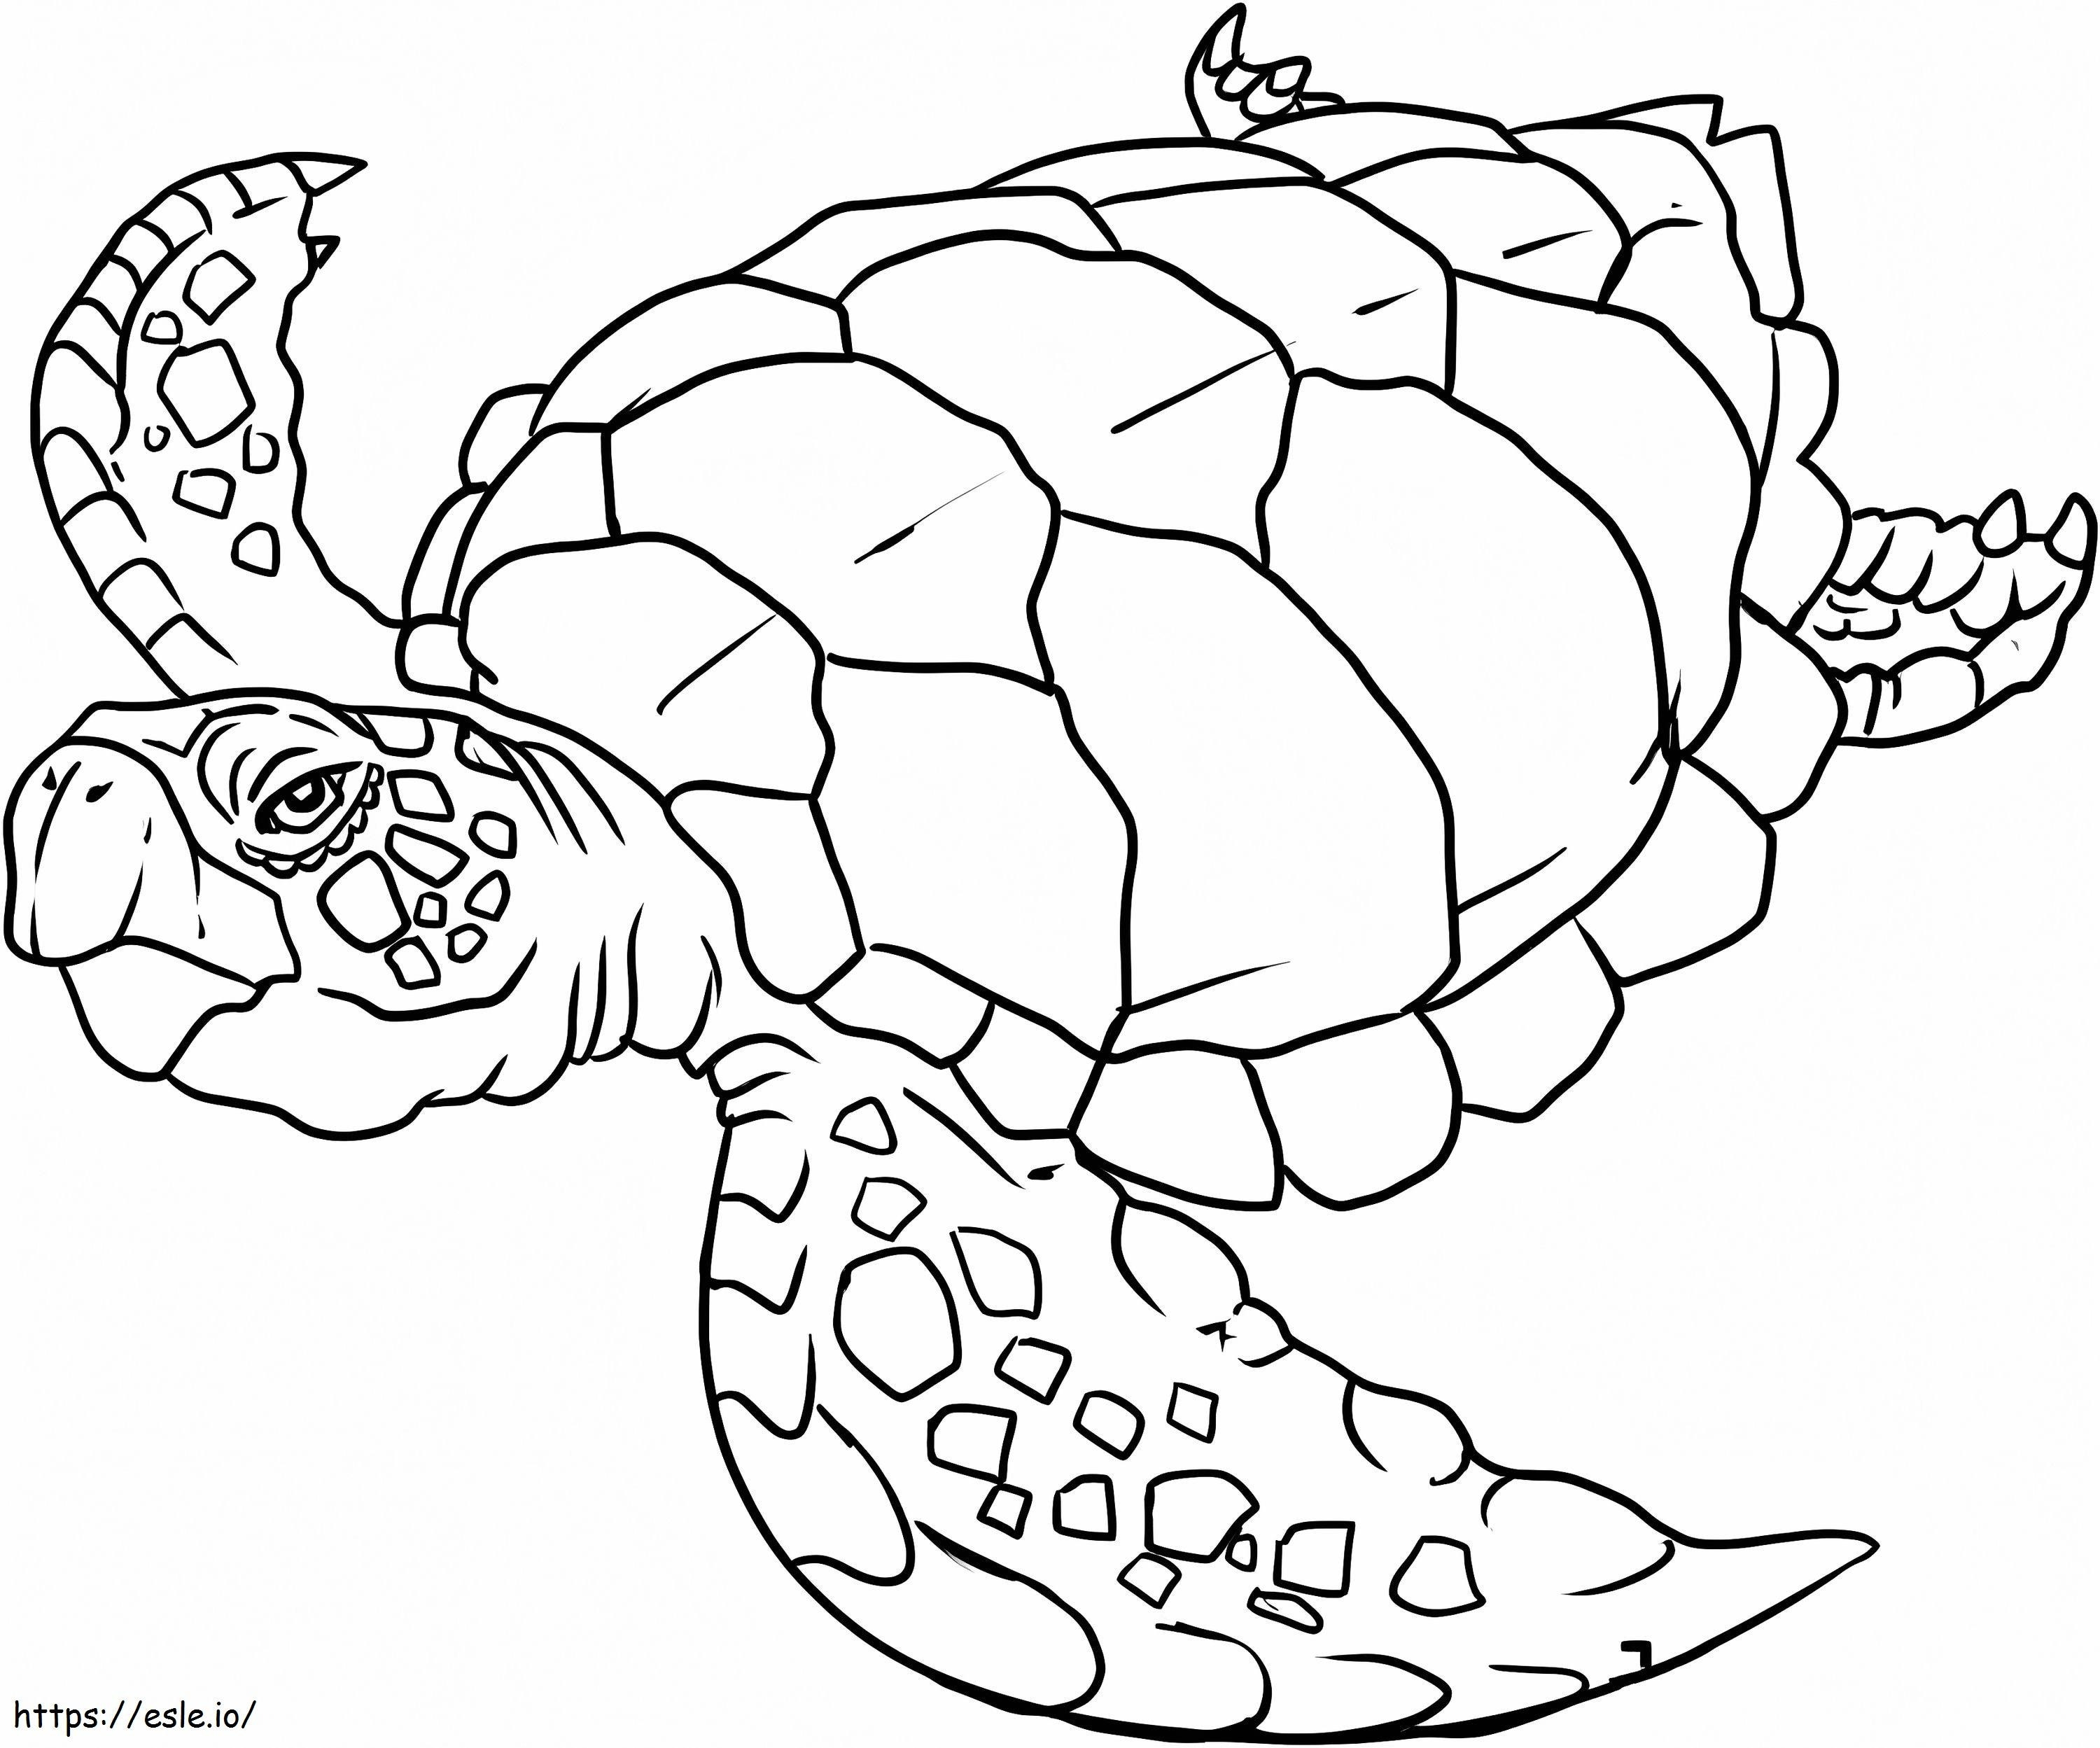 Swimming Turtle 1 coloring page